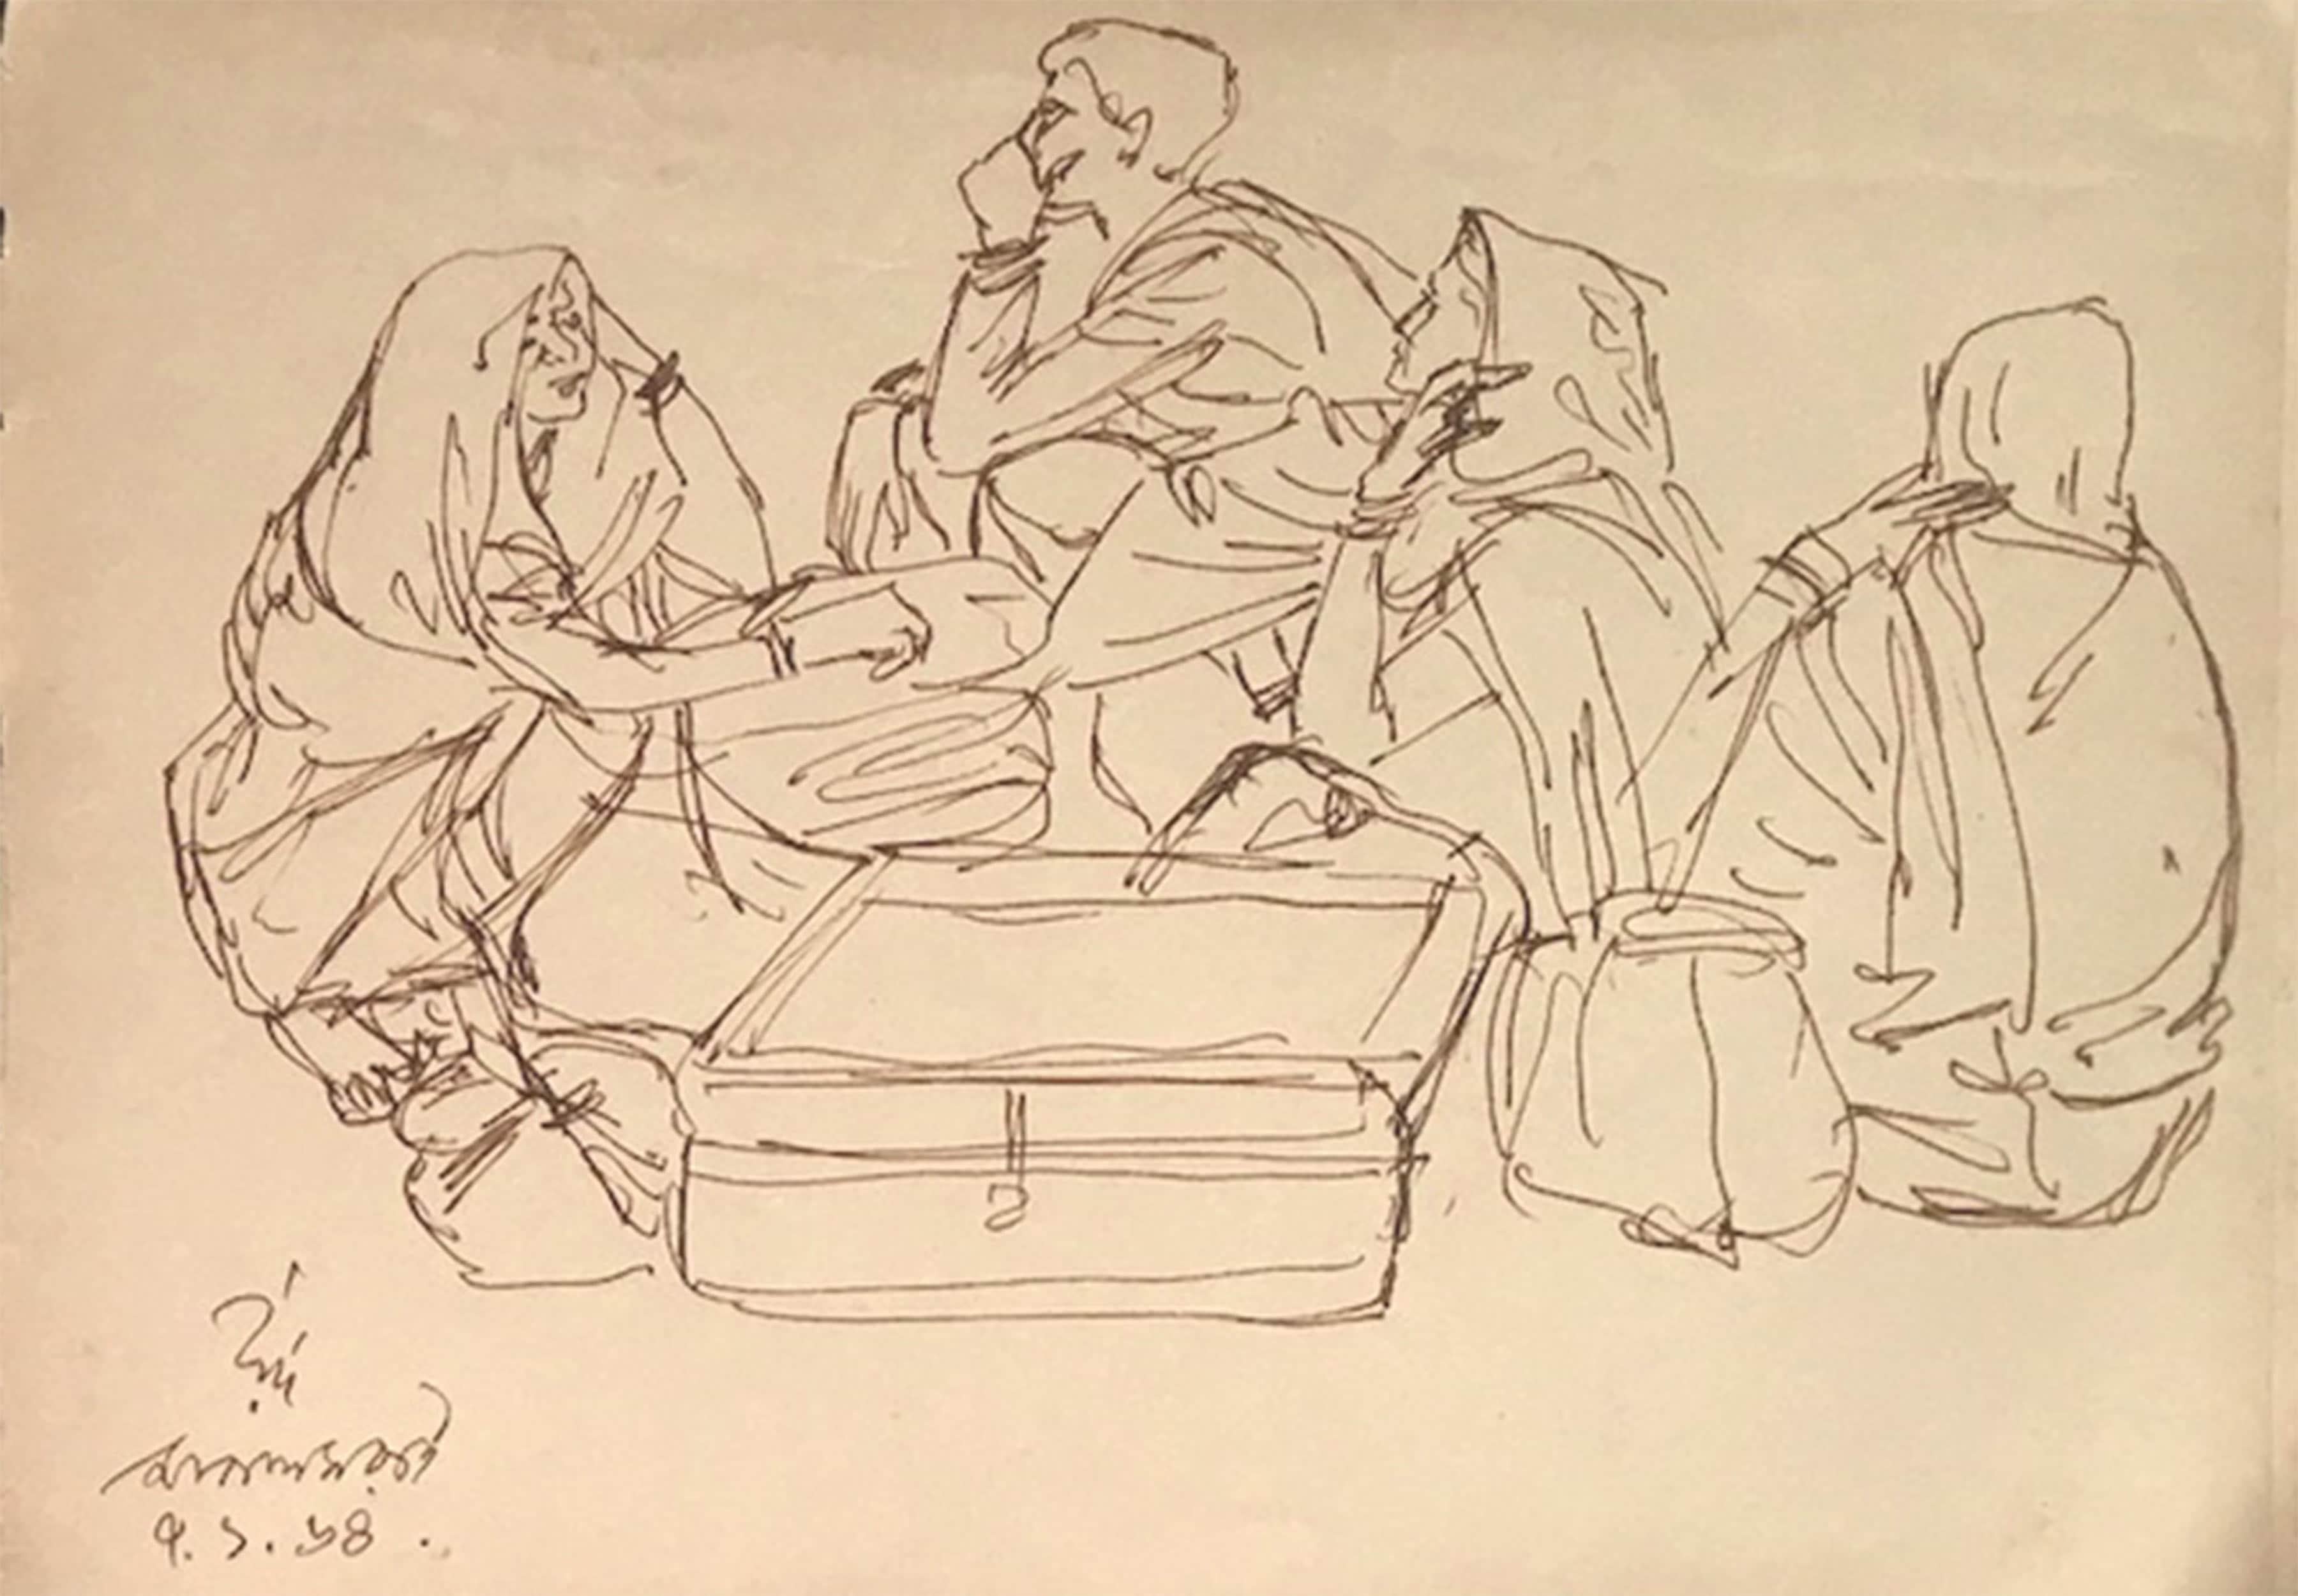 Indian Rural Scene, Travelers, Luggage, Ink on Paper by Modern Artist "In Stock"